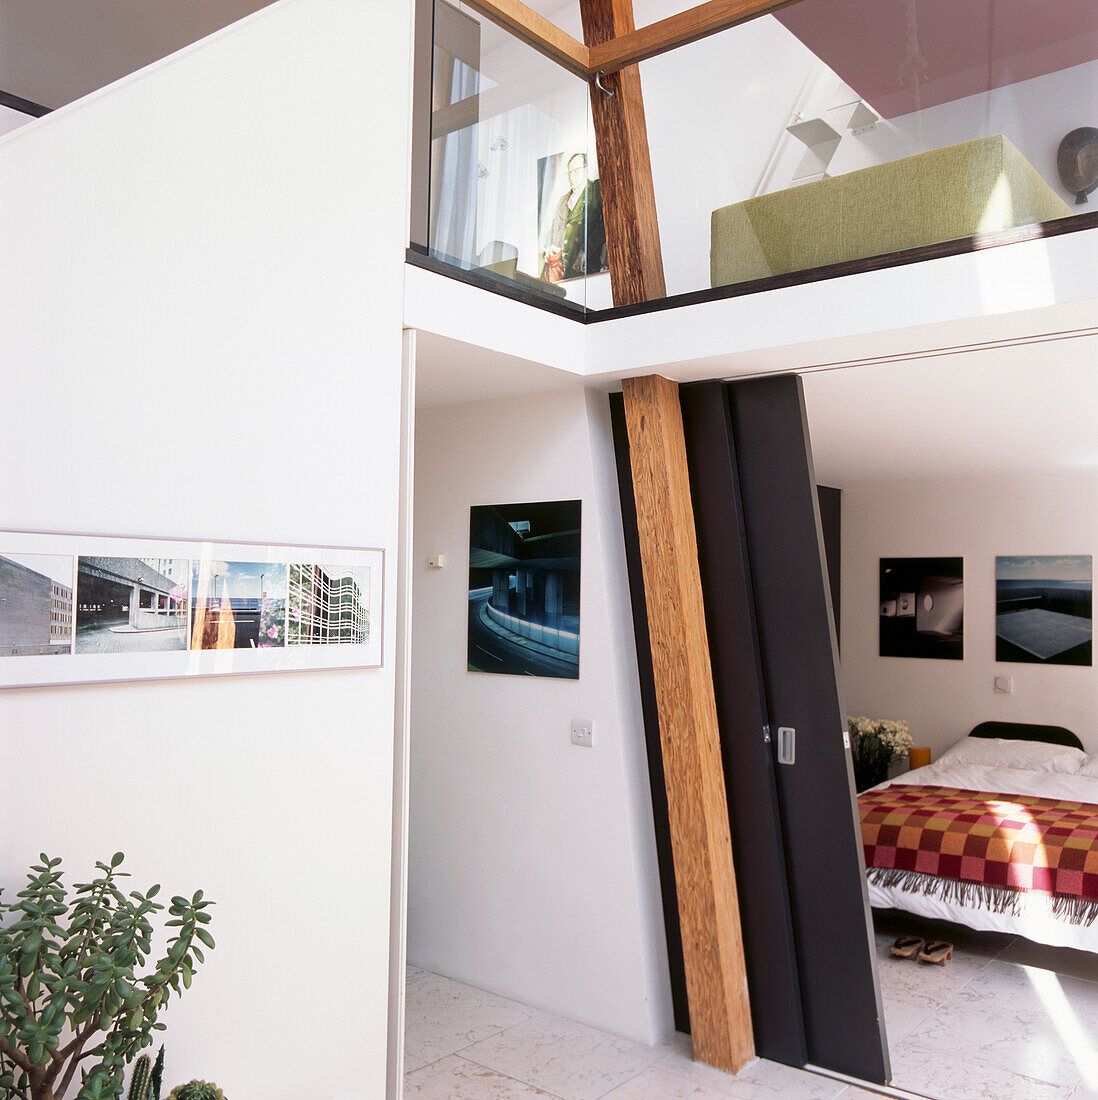 Mezzanine floor above the bedroom in an open plan architect designed conversion